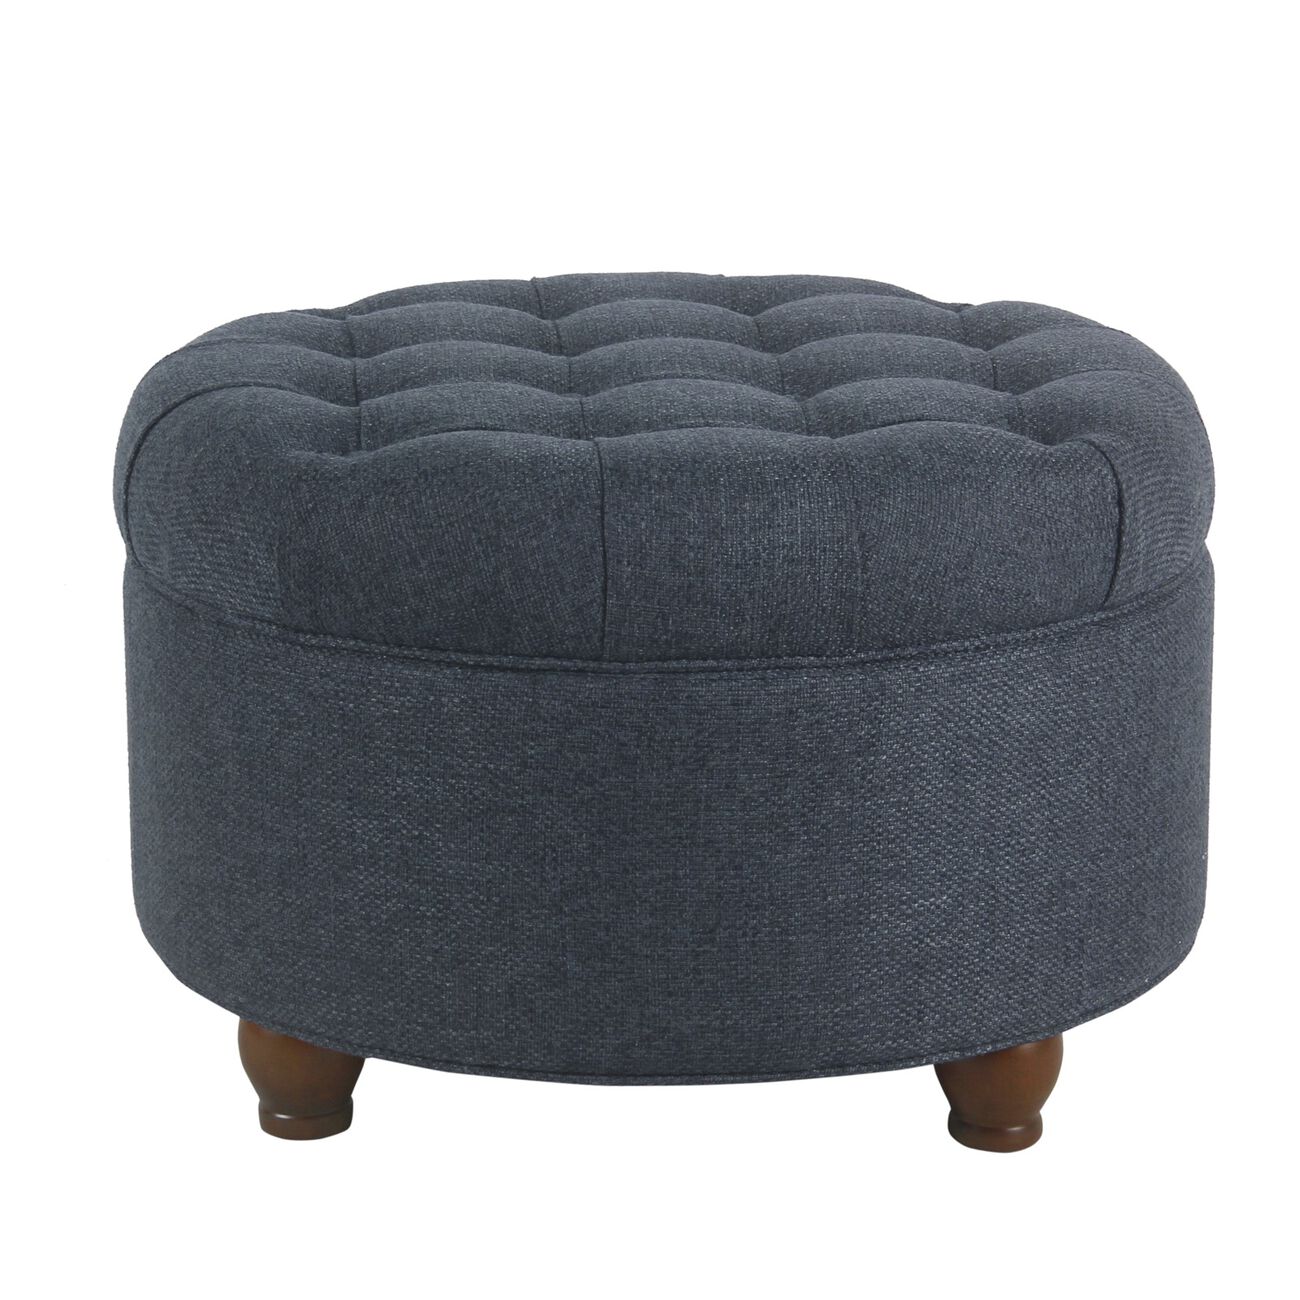 Fabric Upholstered Wooden Ottoman with Tufted Lift Off Lid Storage, Navy Blue